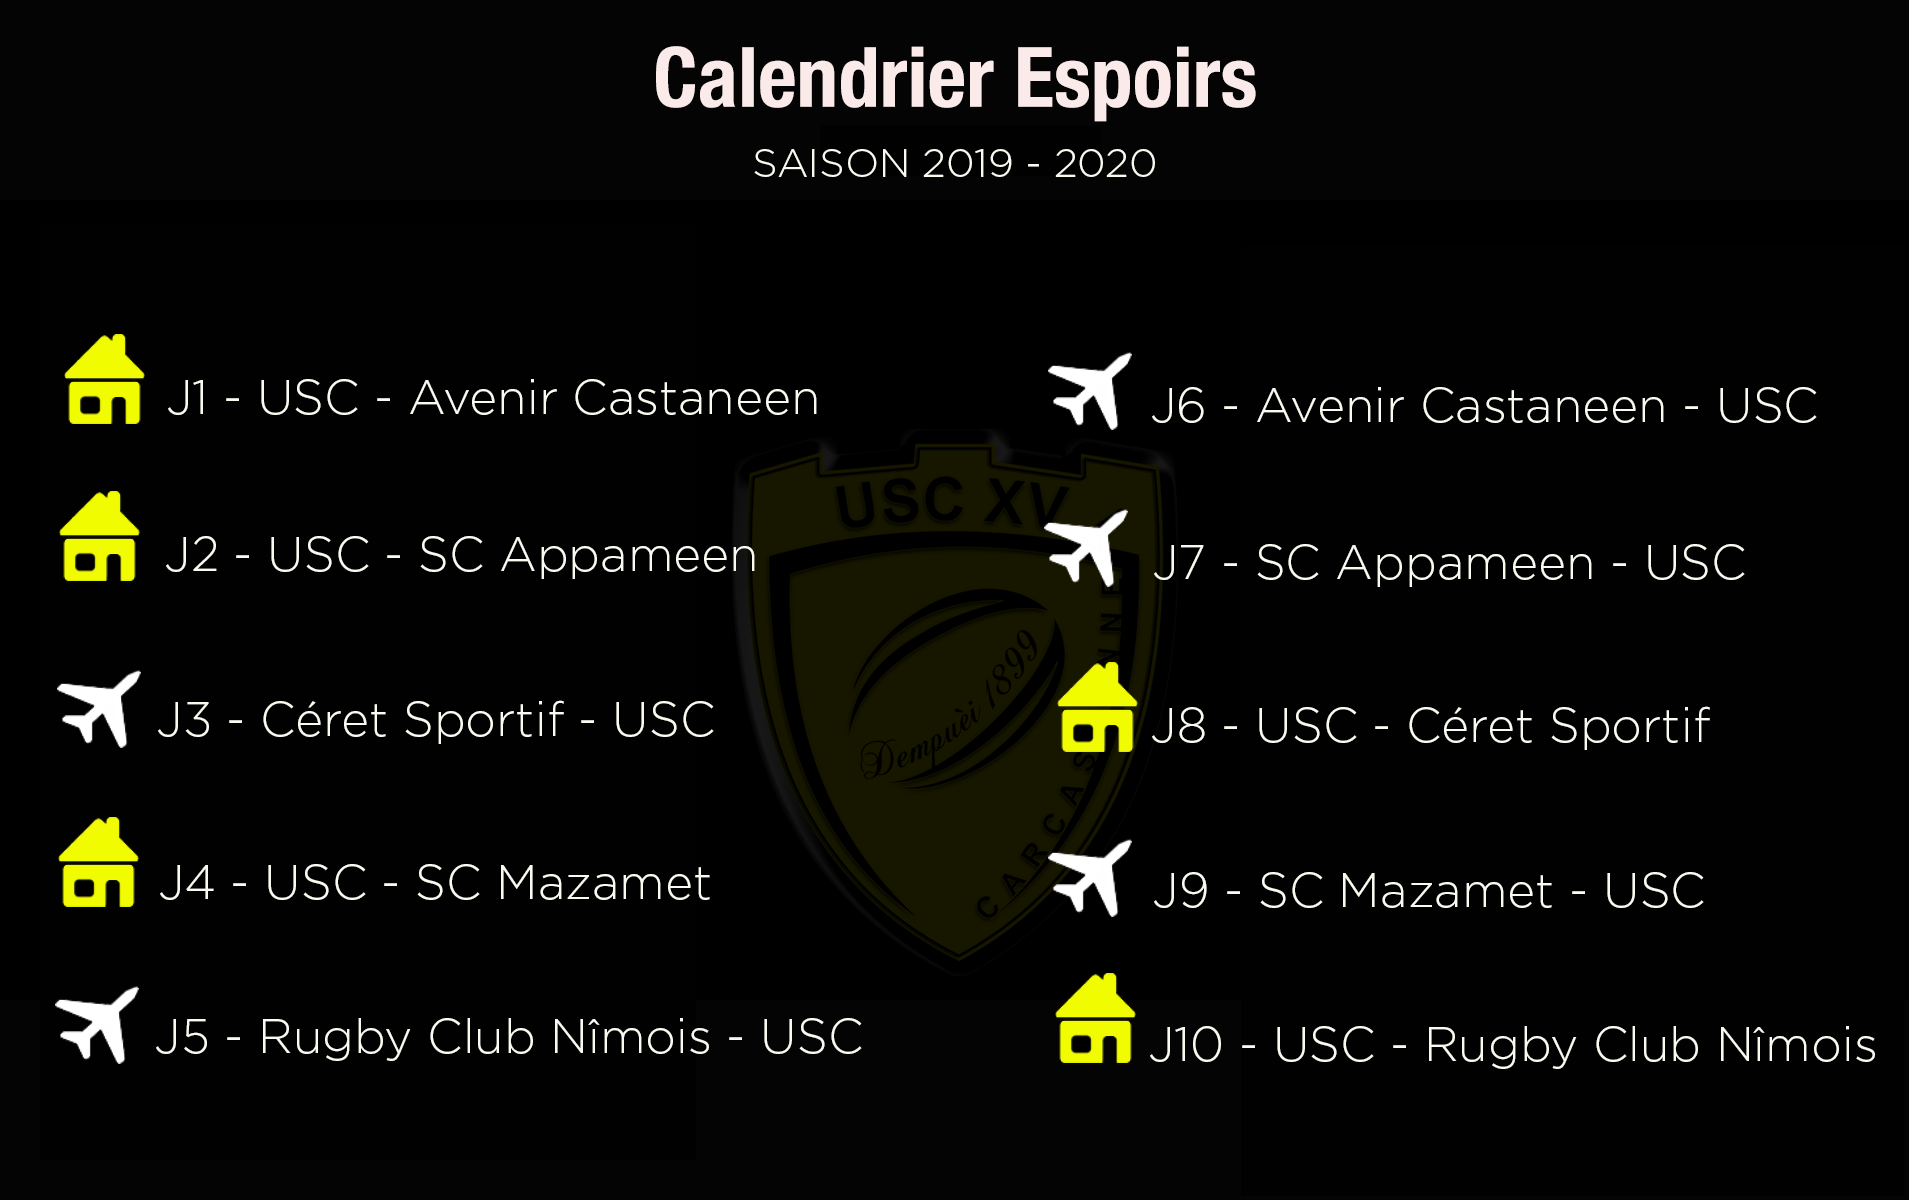 CalendrierEspoirs19-20